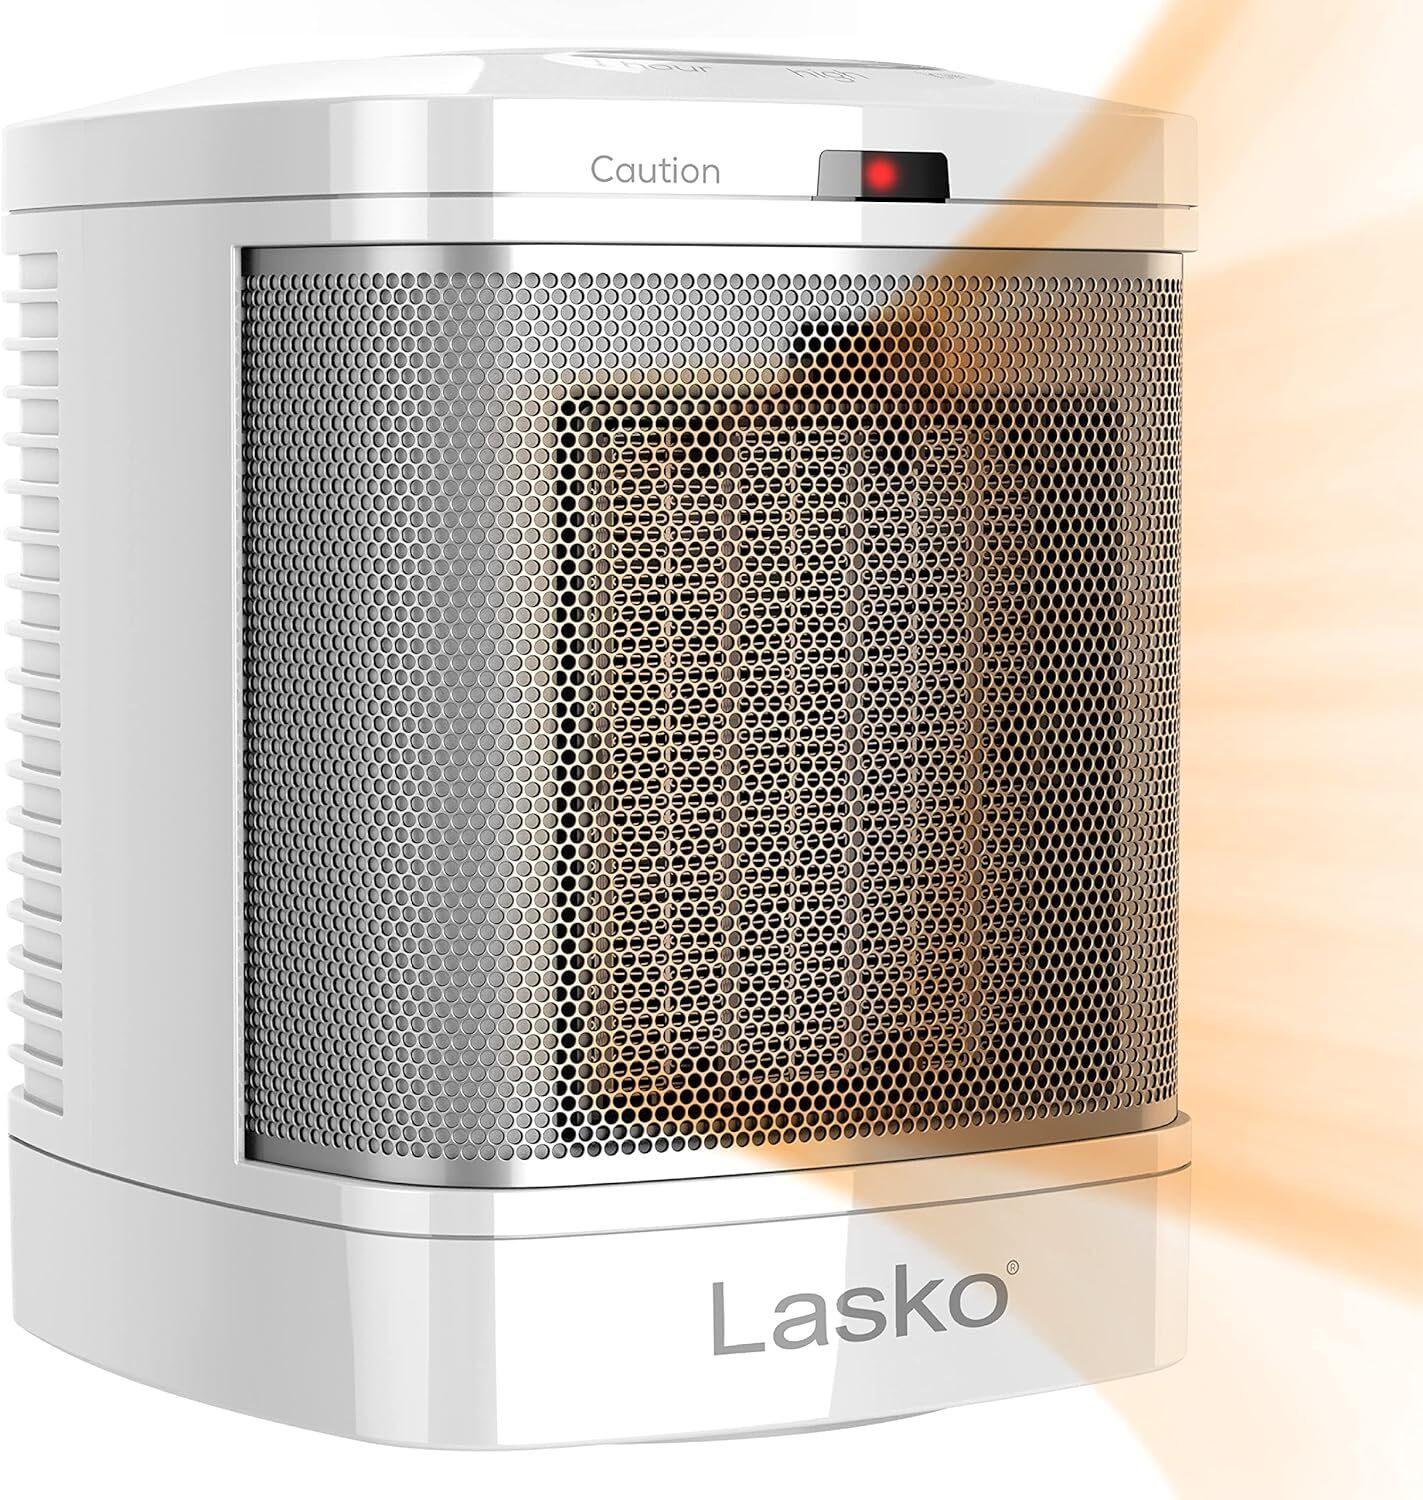 Lasko CD08200 Small Portable Ceramic Space Heaters for Bathroom and  Home Use